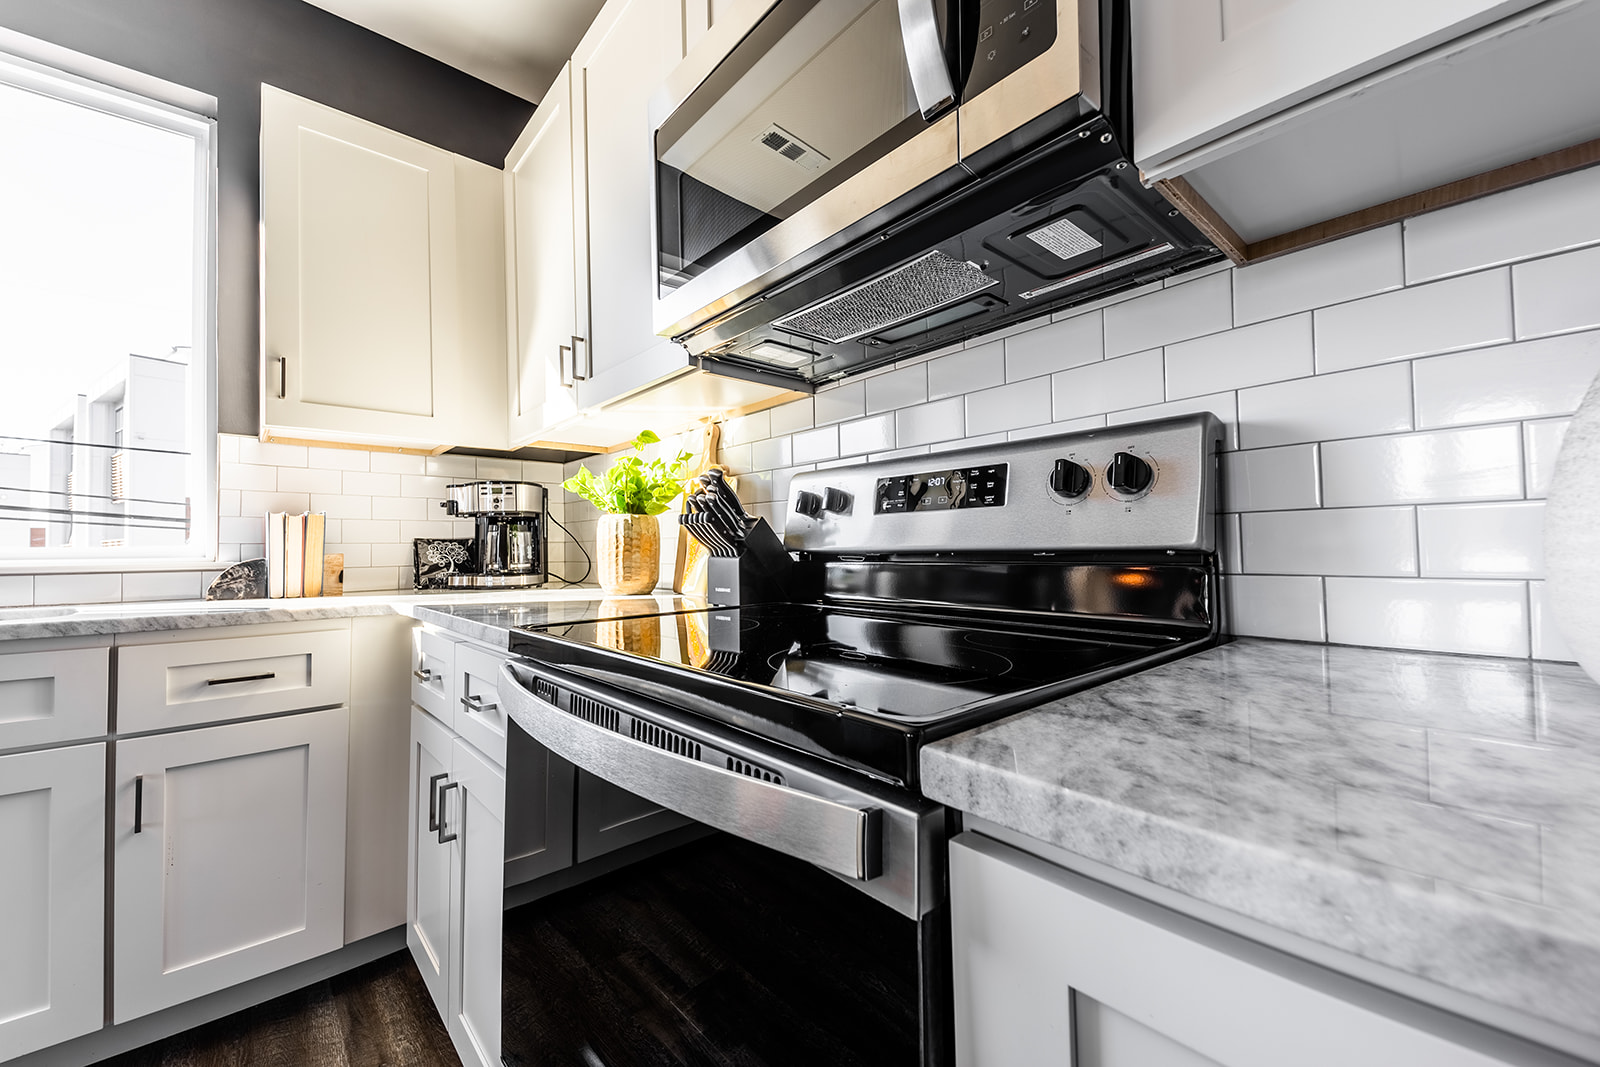 Unit 1: Fully Equipped Kitchen stocked with your basic cooking essentials and stainless-steel appliances. (2nd Floor)